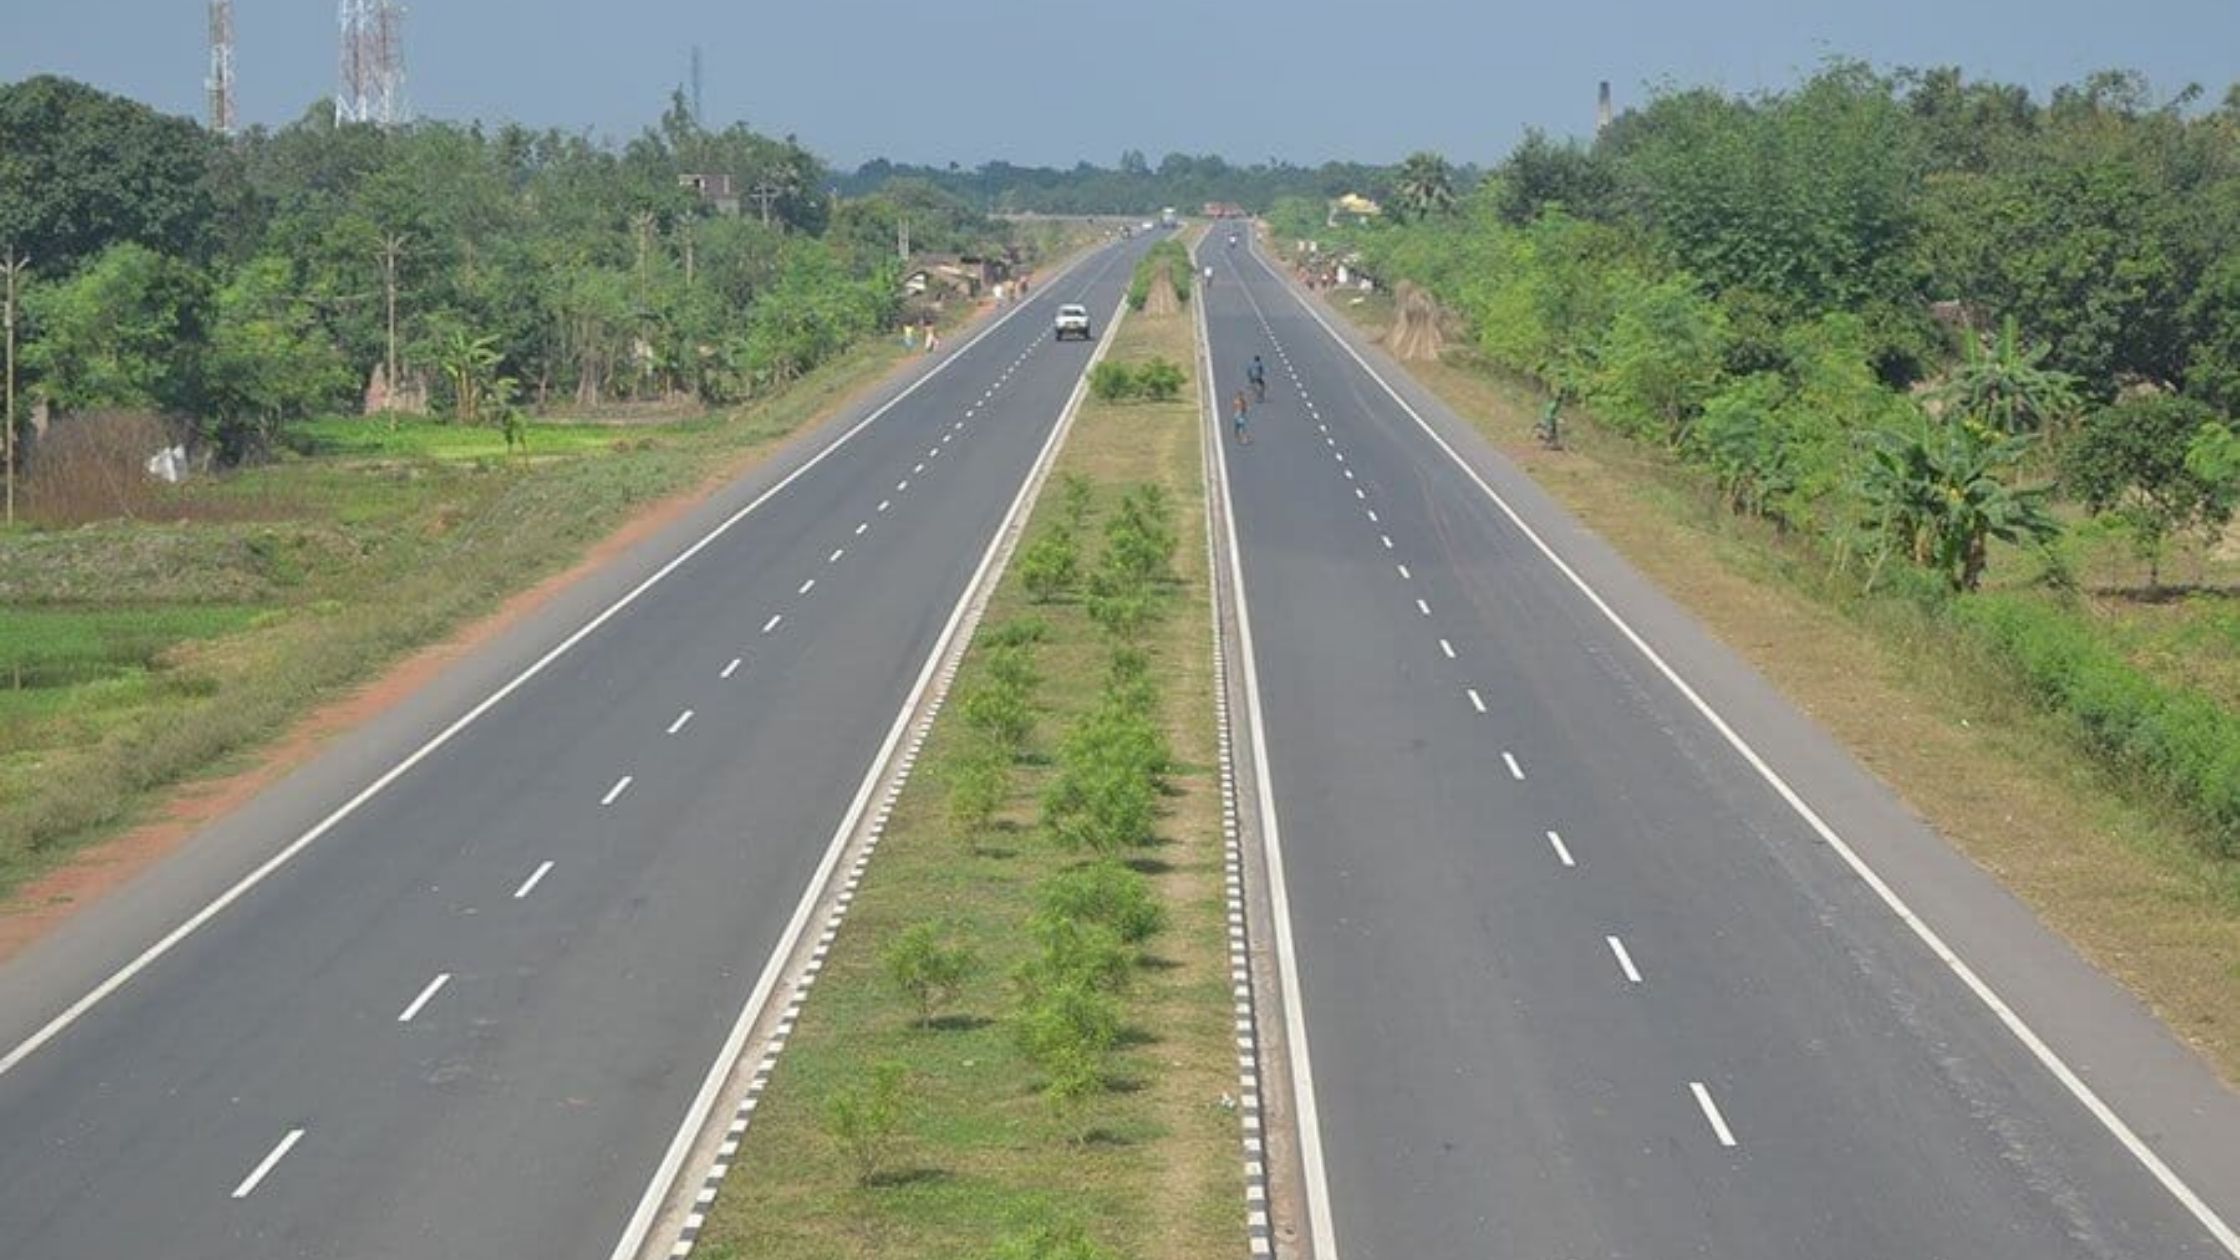 883 crore will be spent on NH 80